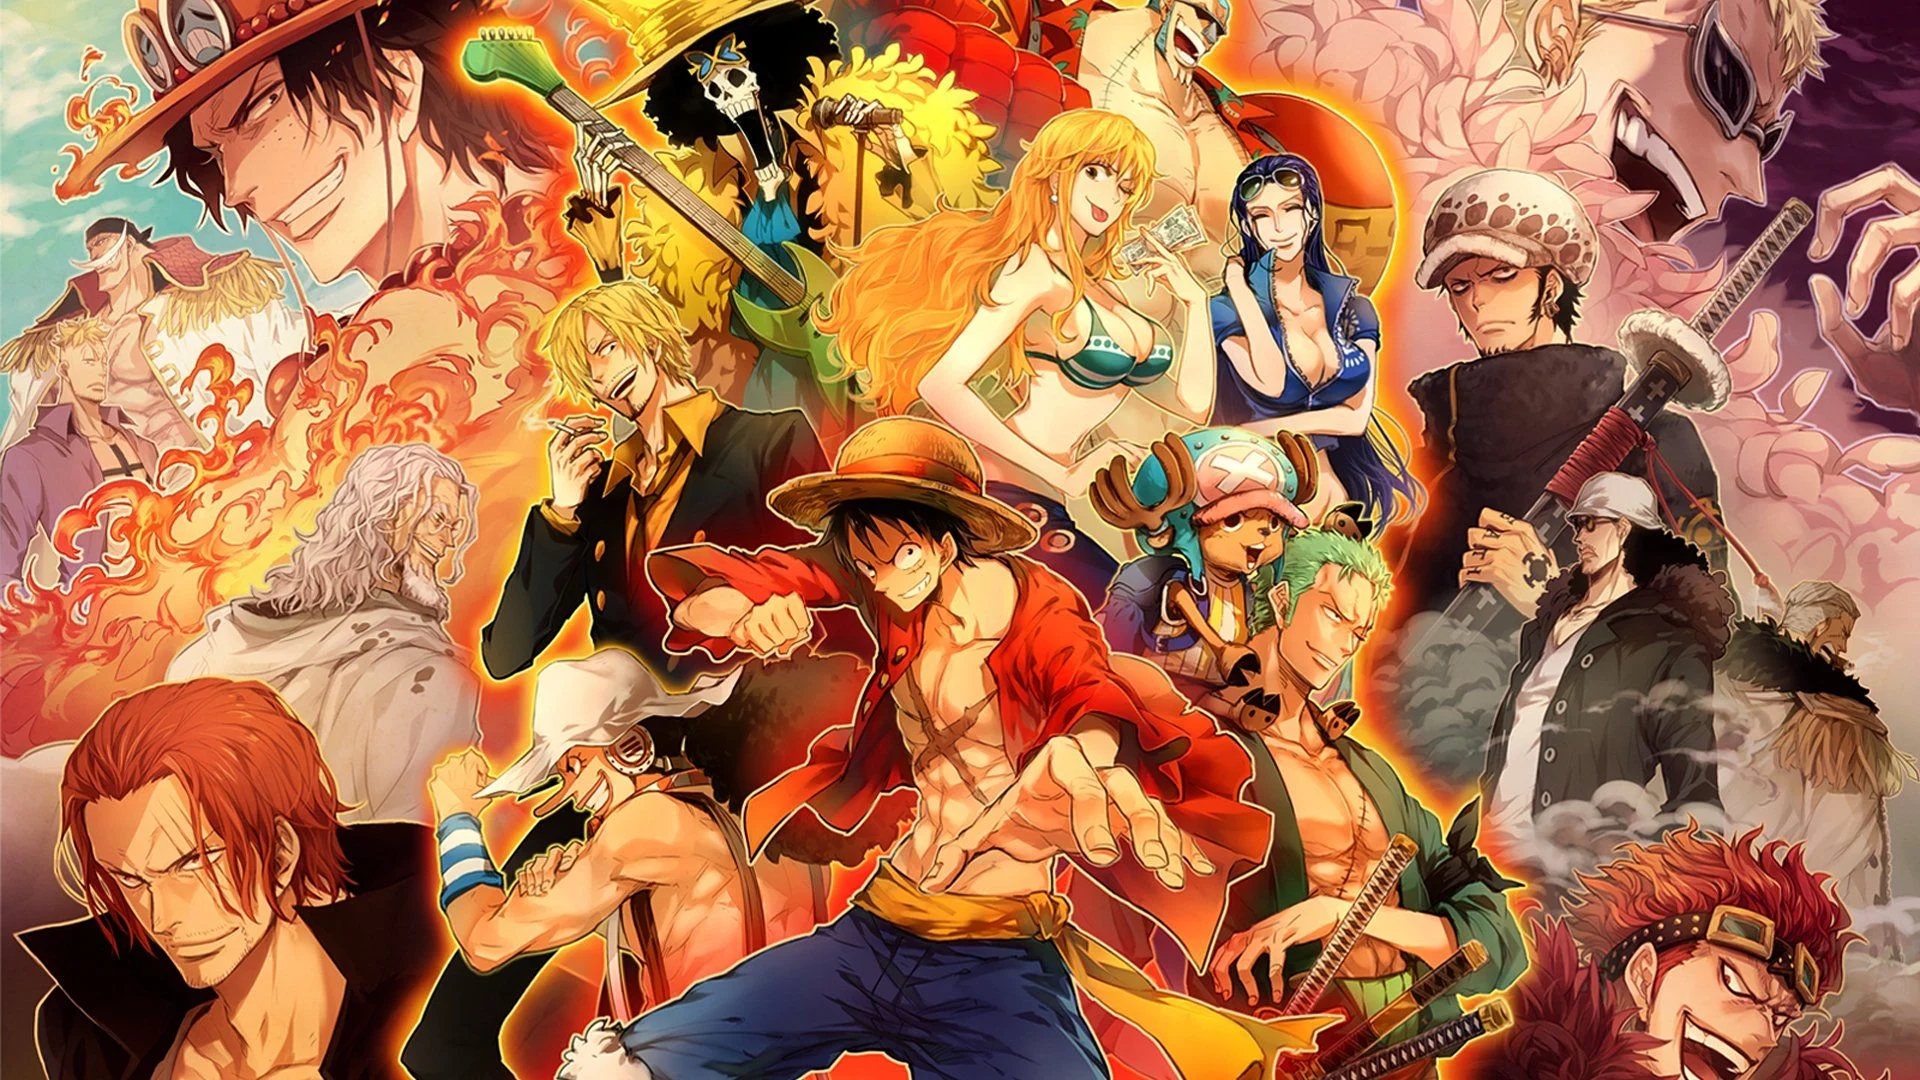 1920x1080 One Piece Anime Wallpapers Top Free One Piece Anime Backgrounds